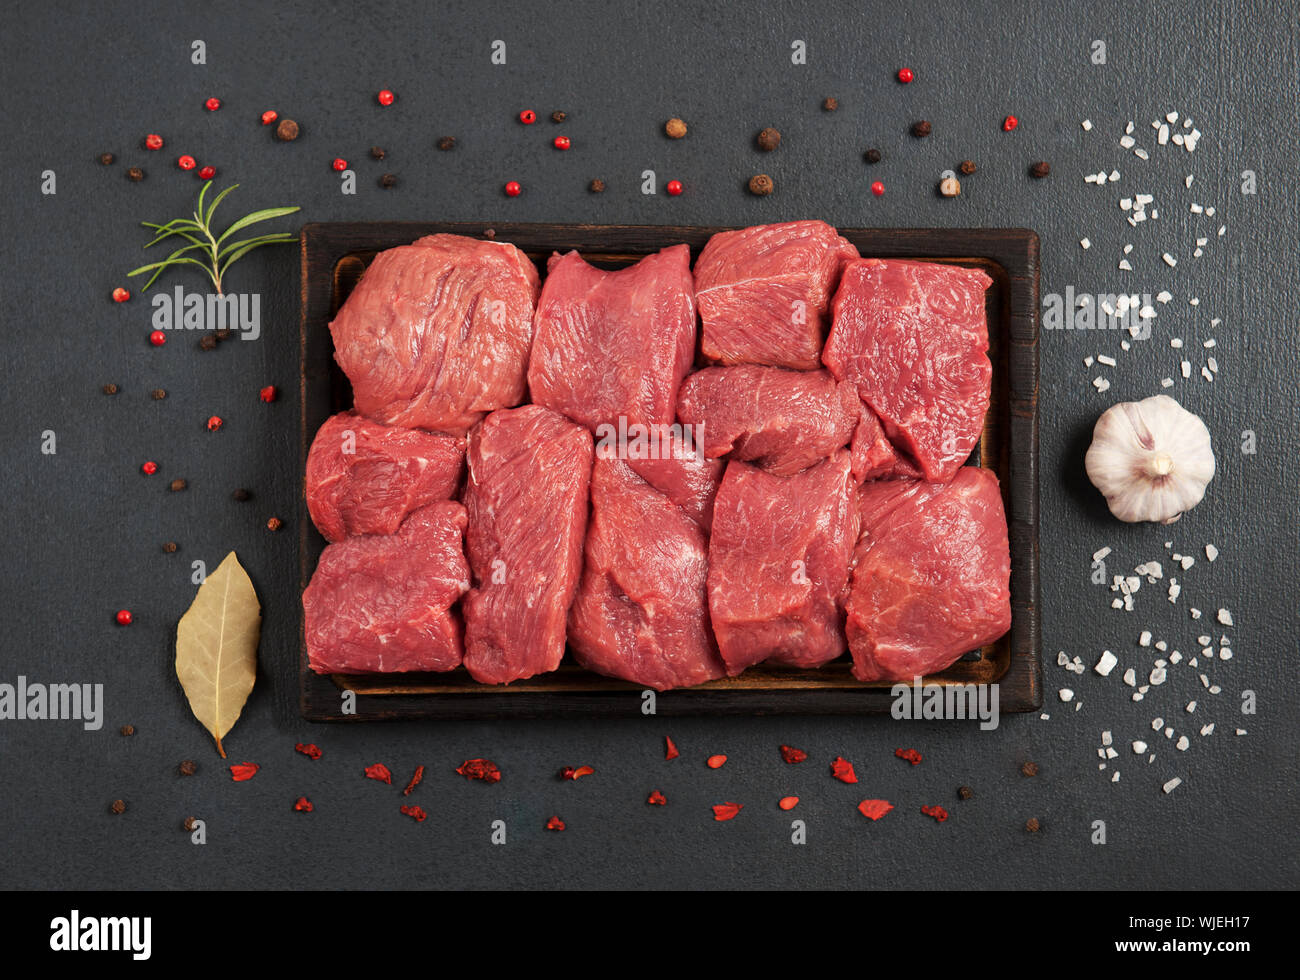 Tasty raw veal or beef meat with spices on the dark background.Pieces of red meat.Flat lay , horizontal orientation. Stock Photo